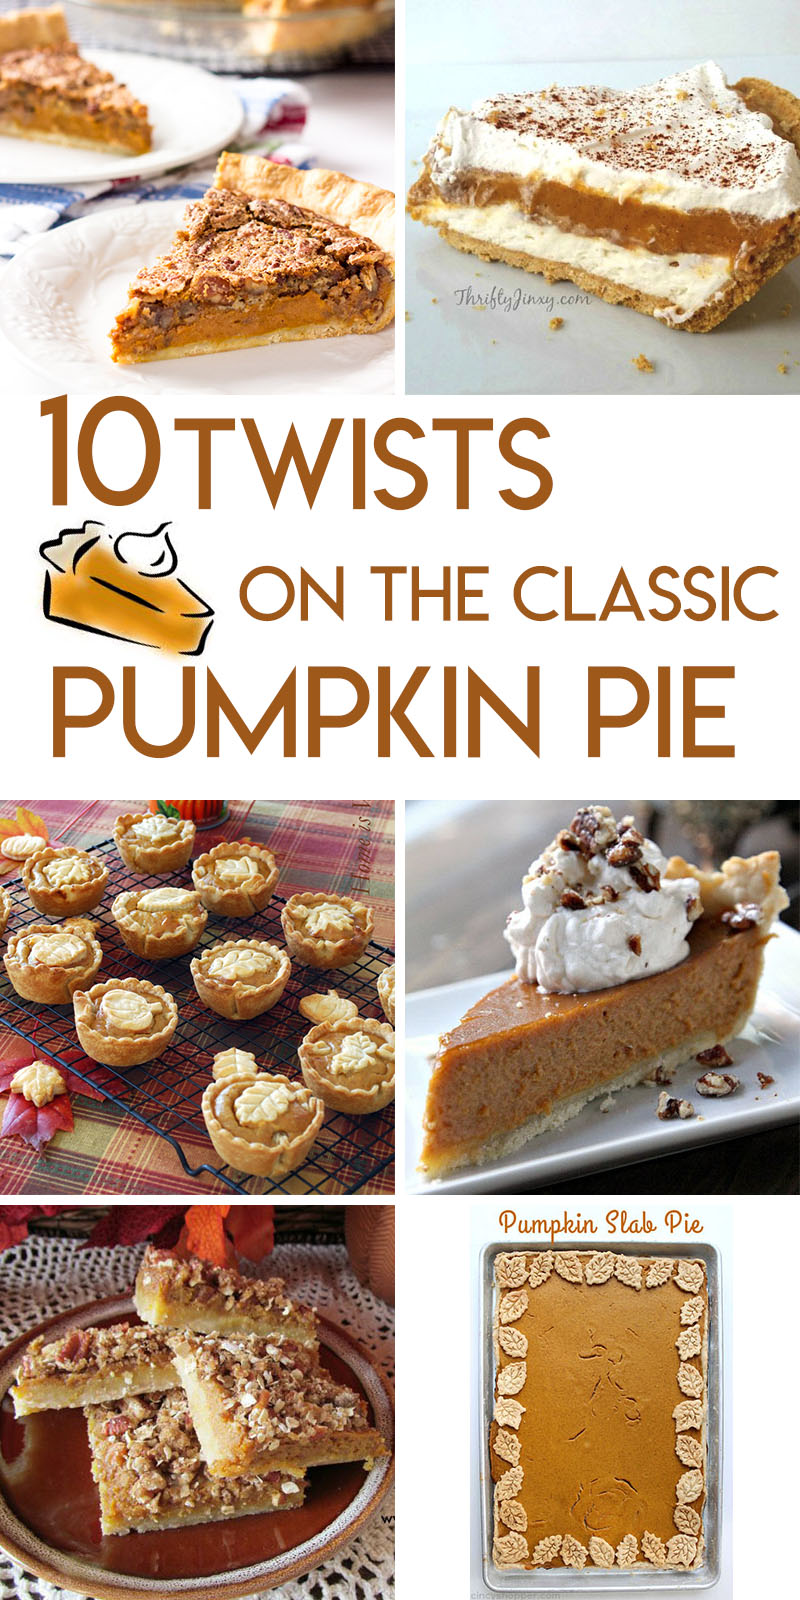 10 Twists on the Classic Pumpkin Pie | Random Acts of Baking